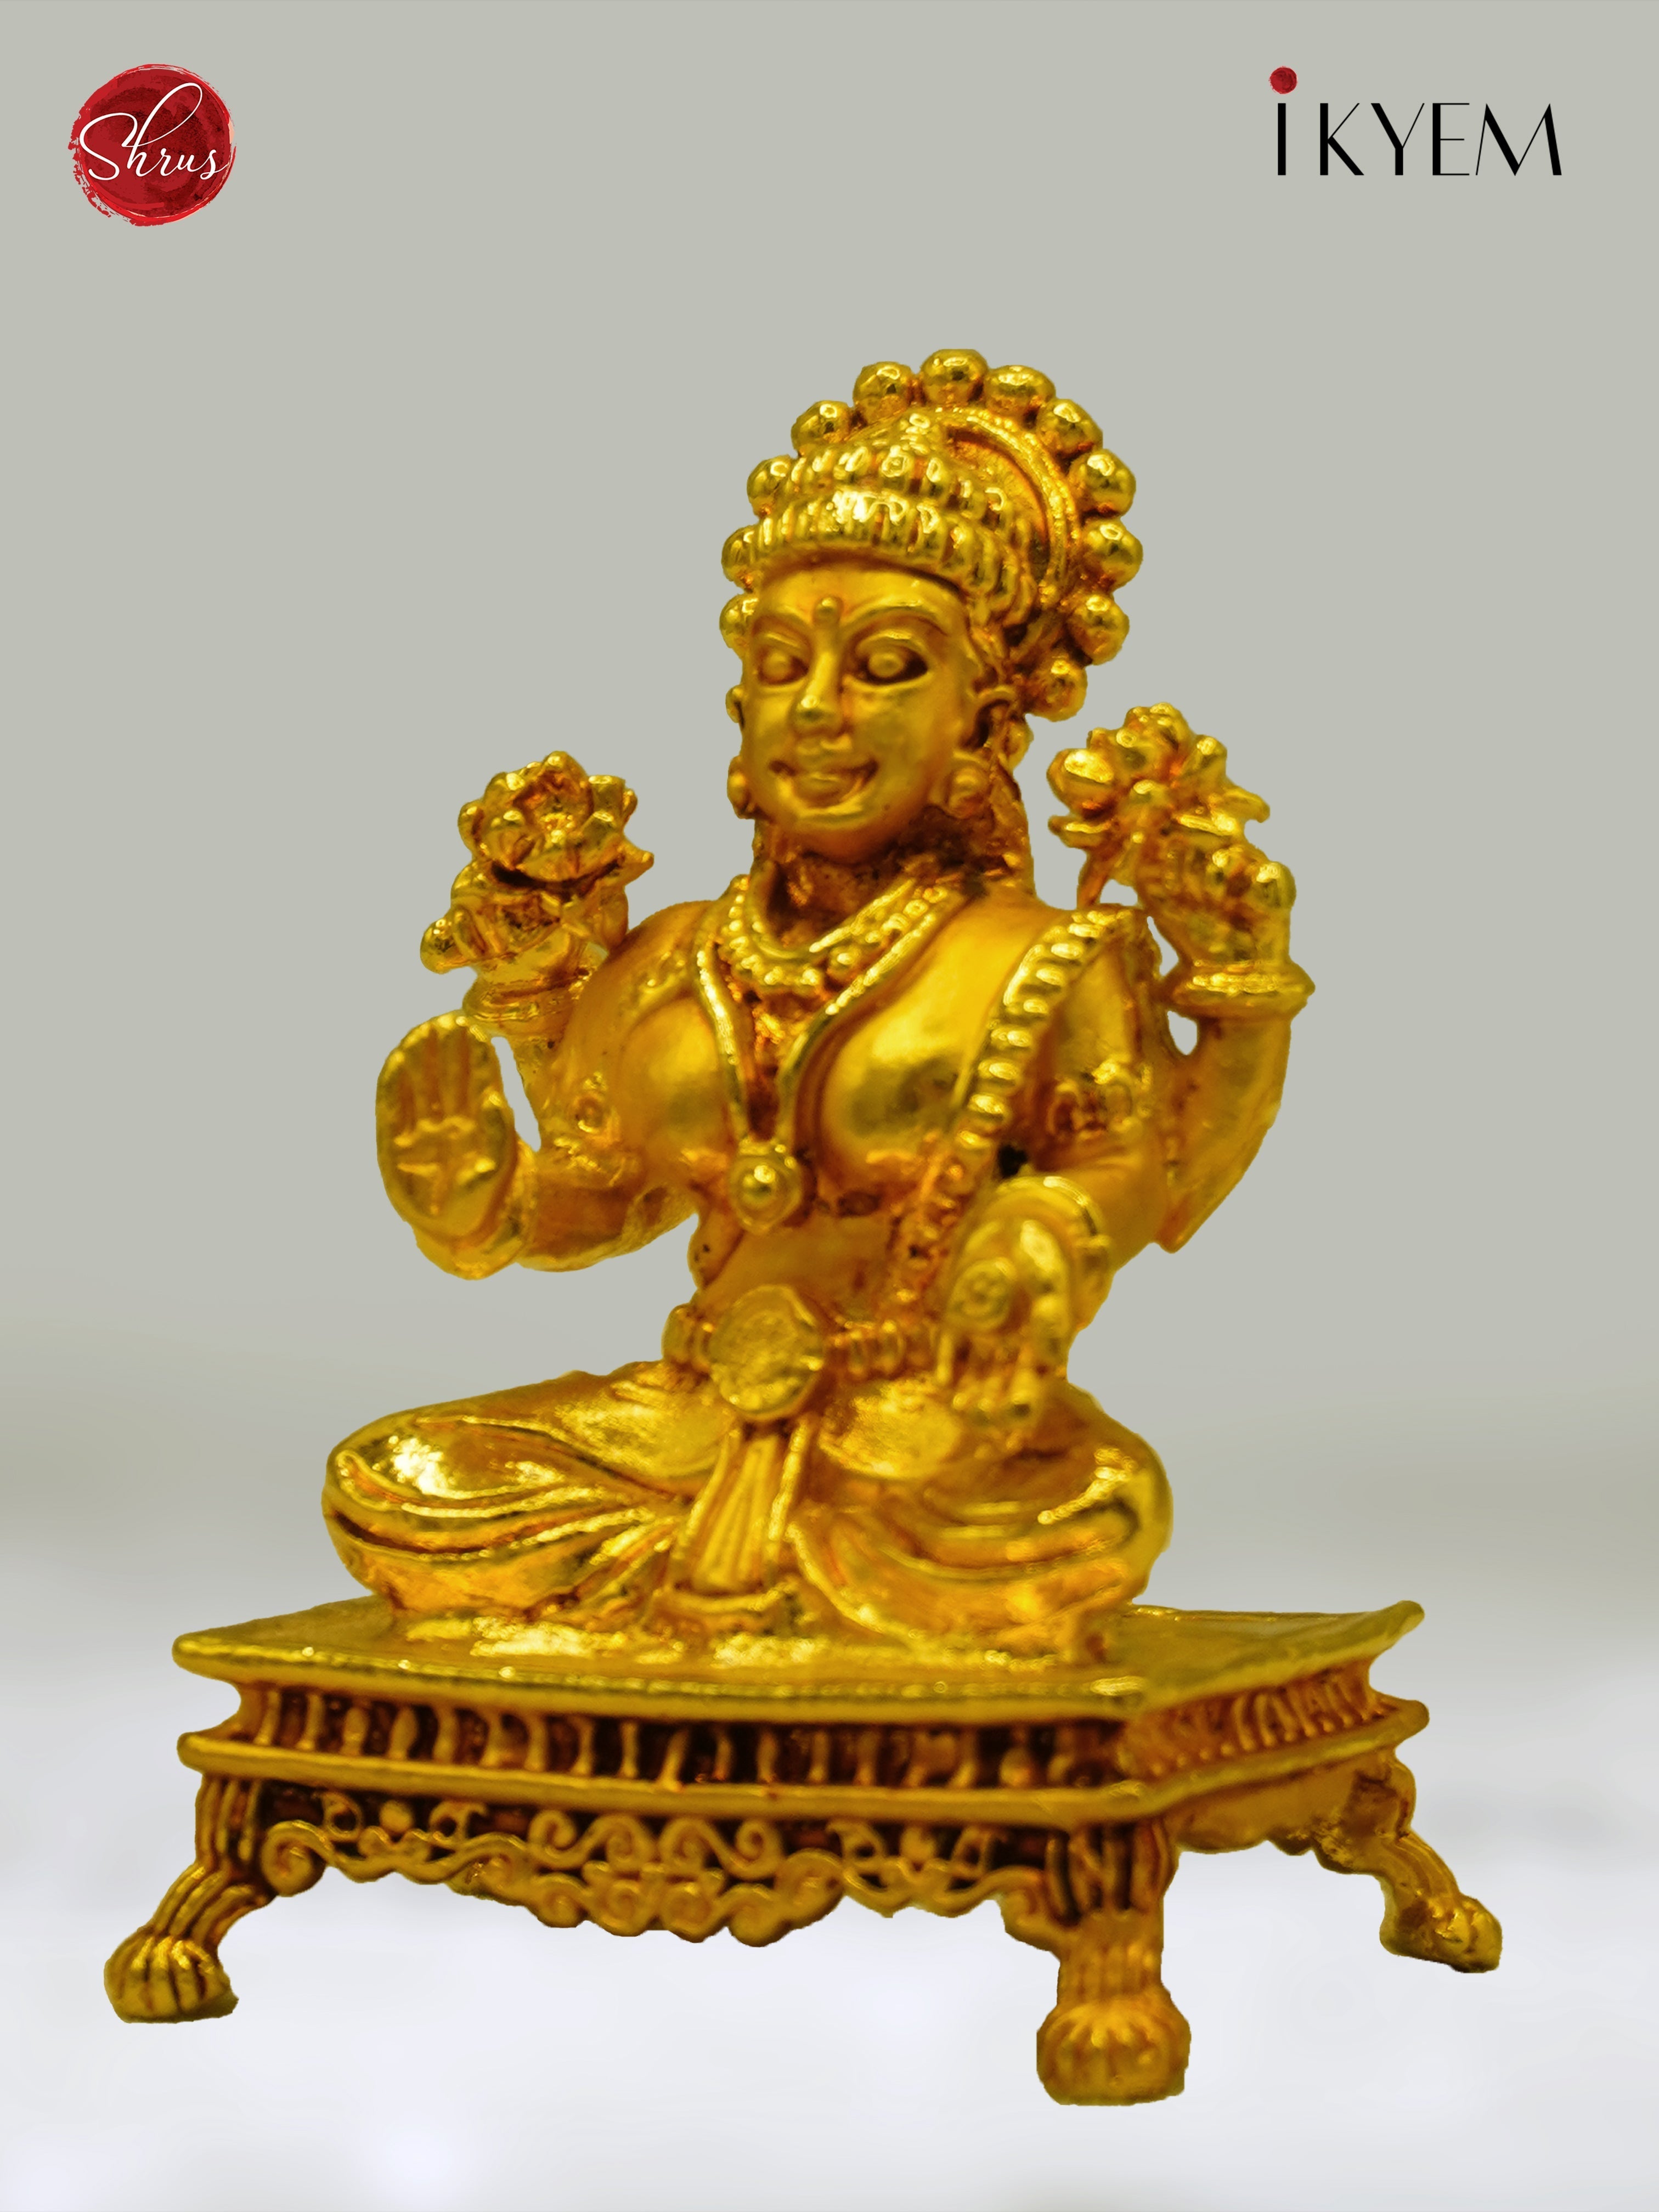 24 KT Gold Coated On Copper - Finely Crafted feature rich aadi Lakshmi - Shop on ShrusEternity.com